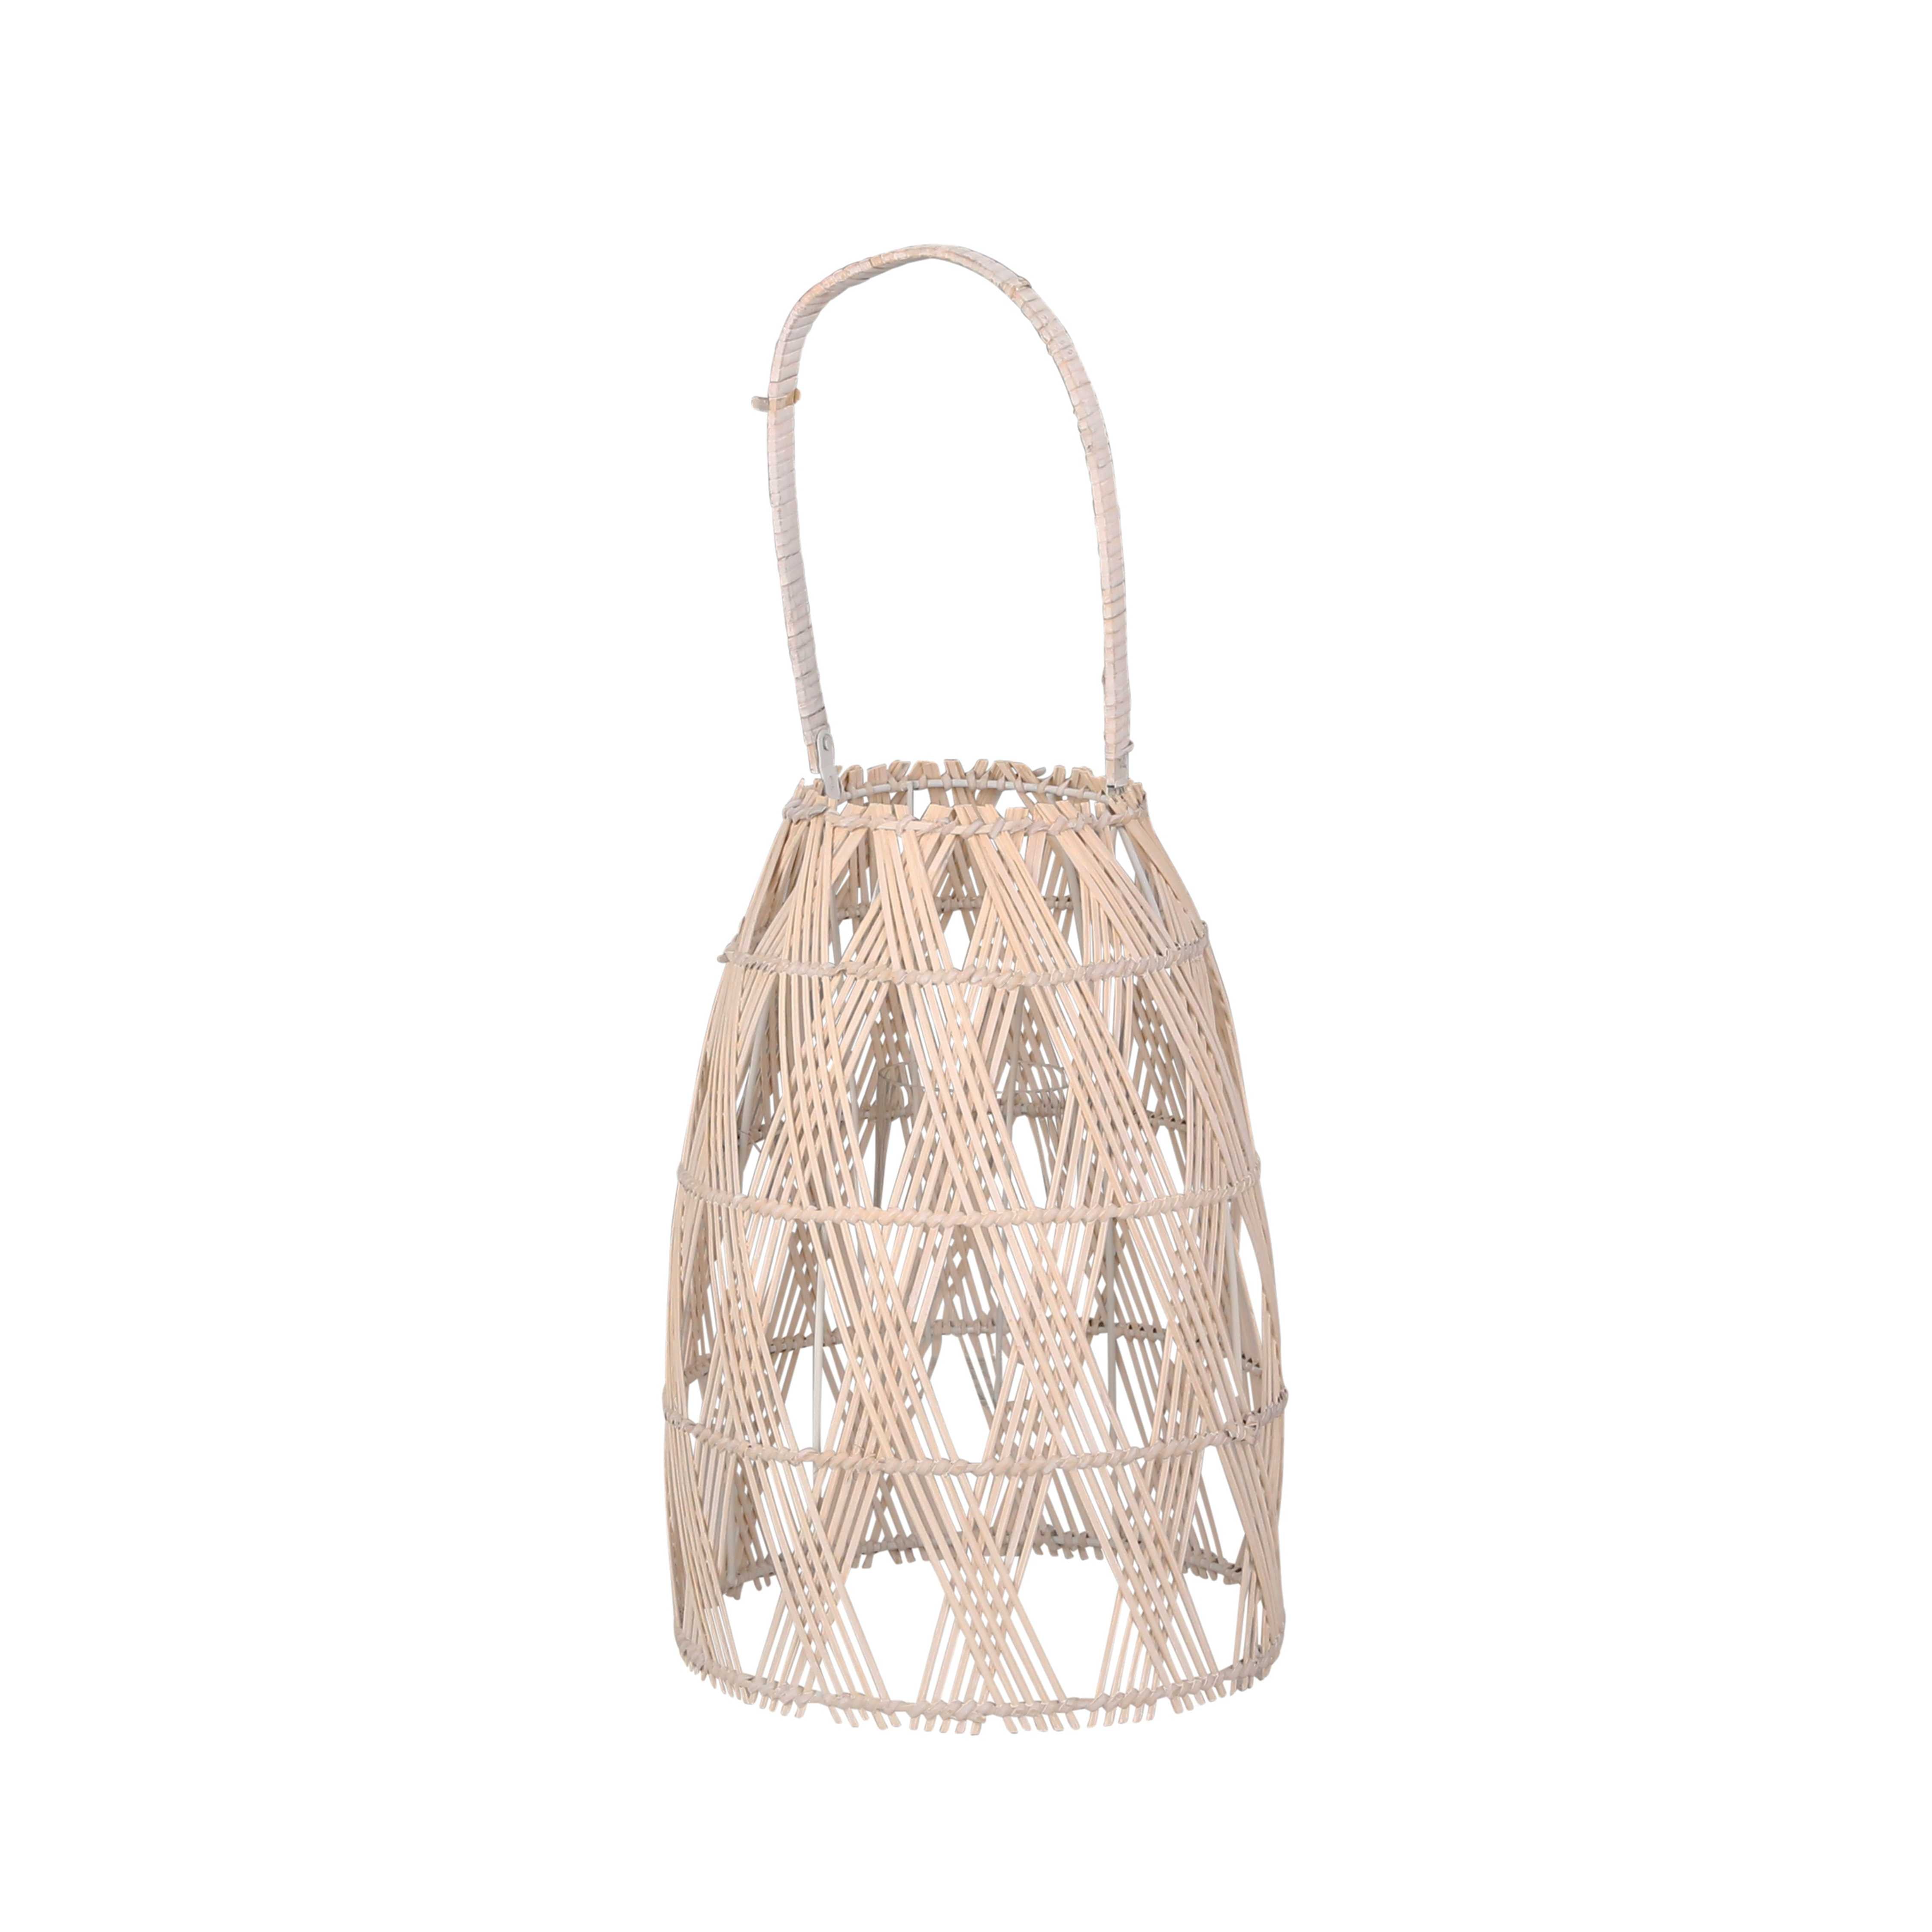 Woven Bamboo Wall Hanging Lantern with X Shaped Binding, Small, Beige